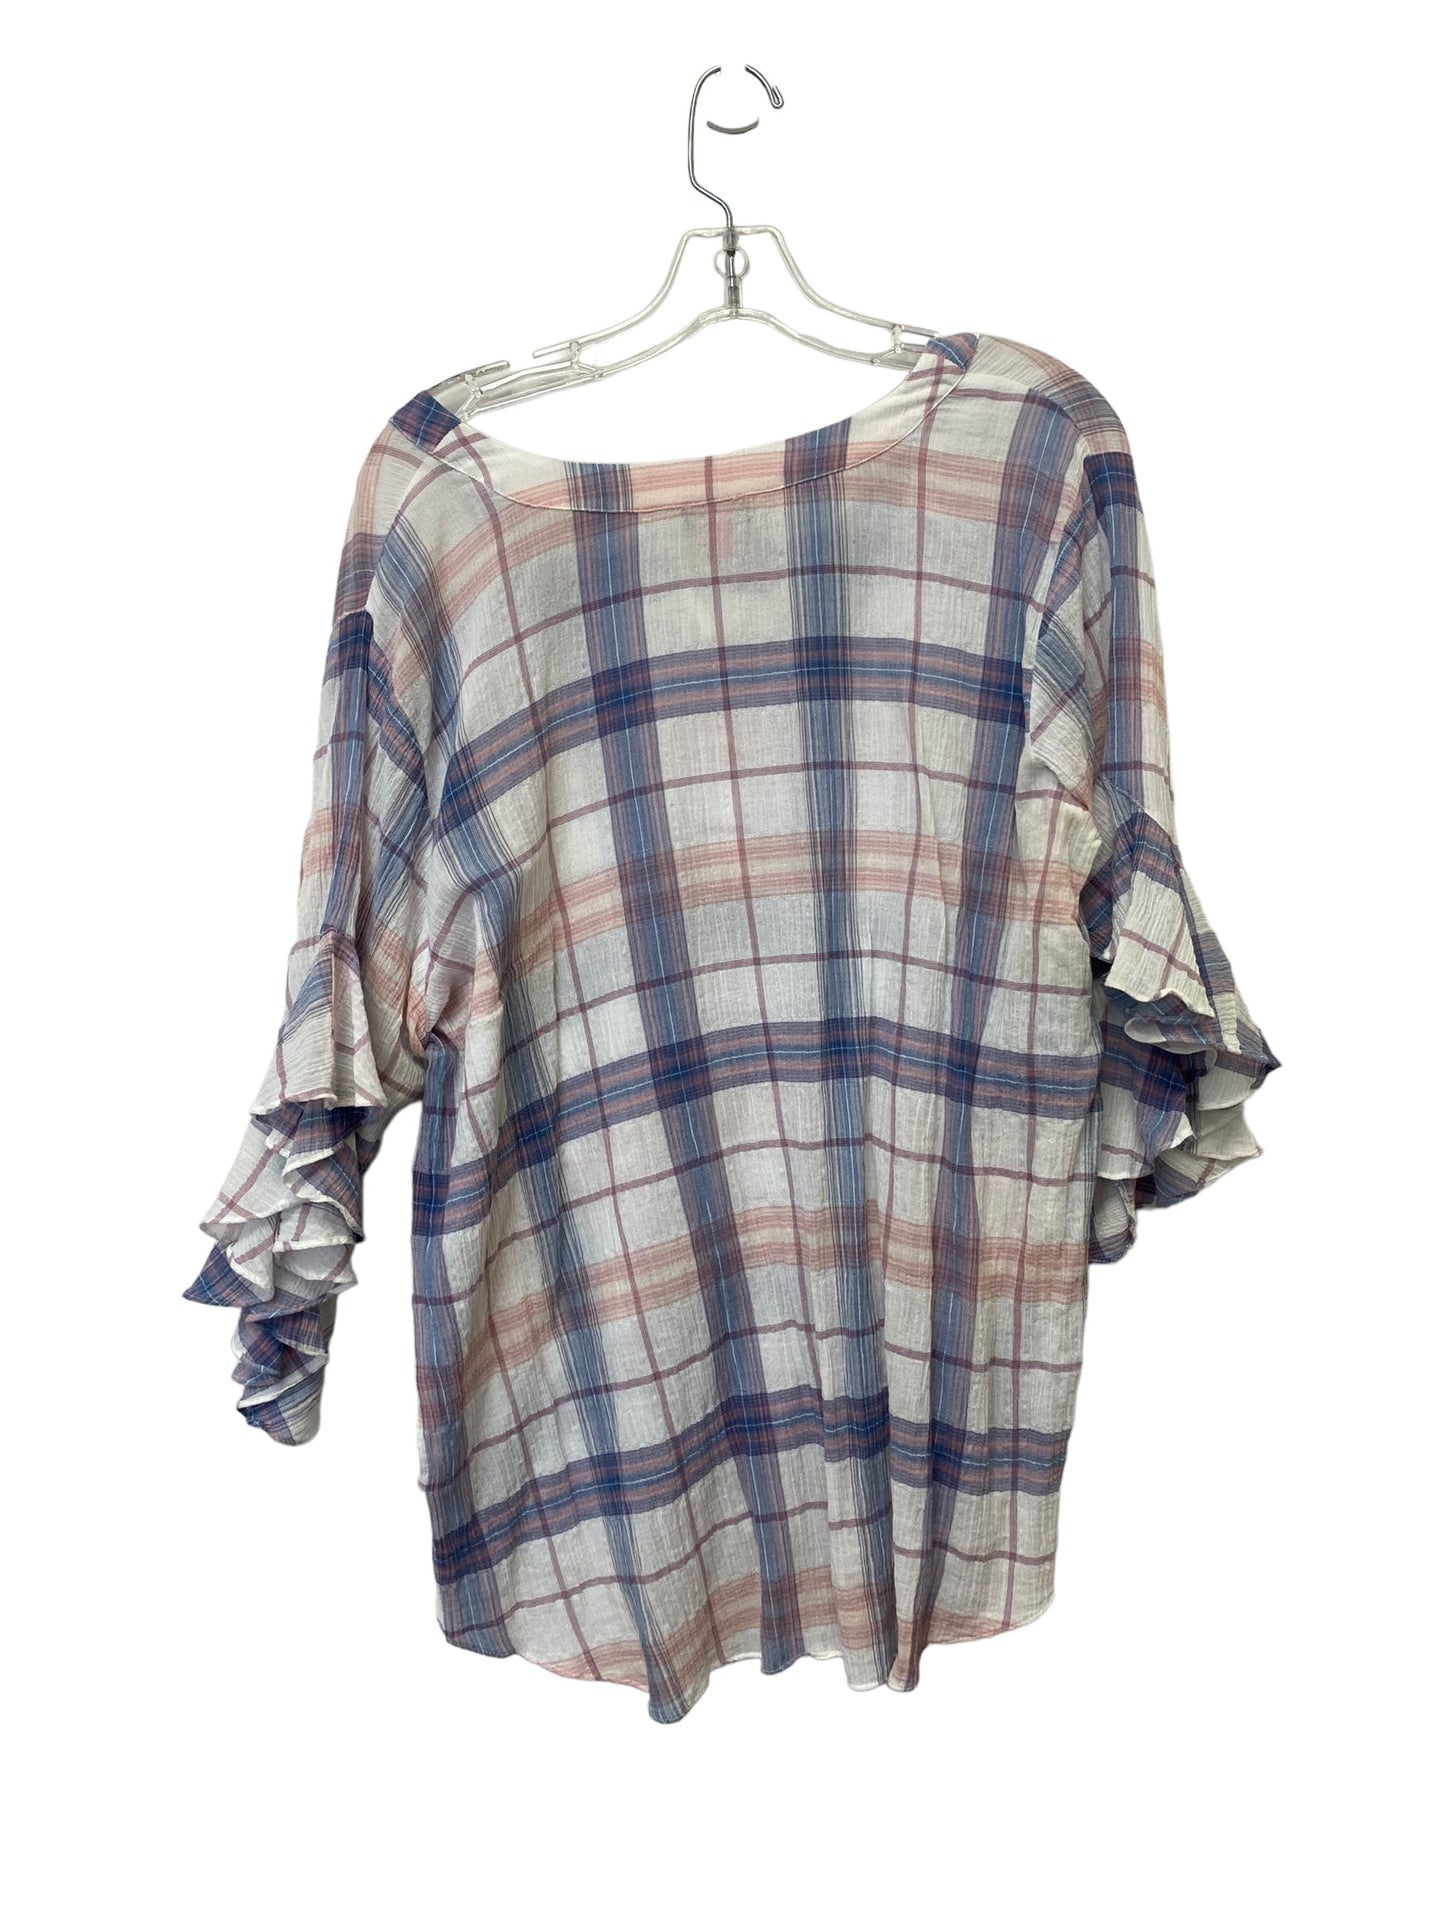 Plaid Pattern Top Short Sleeve Vince Camuto, Size 1x